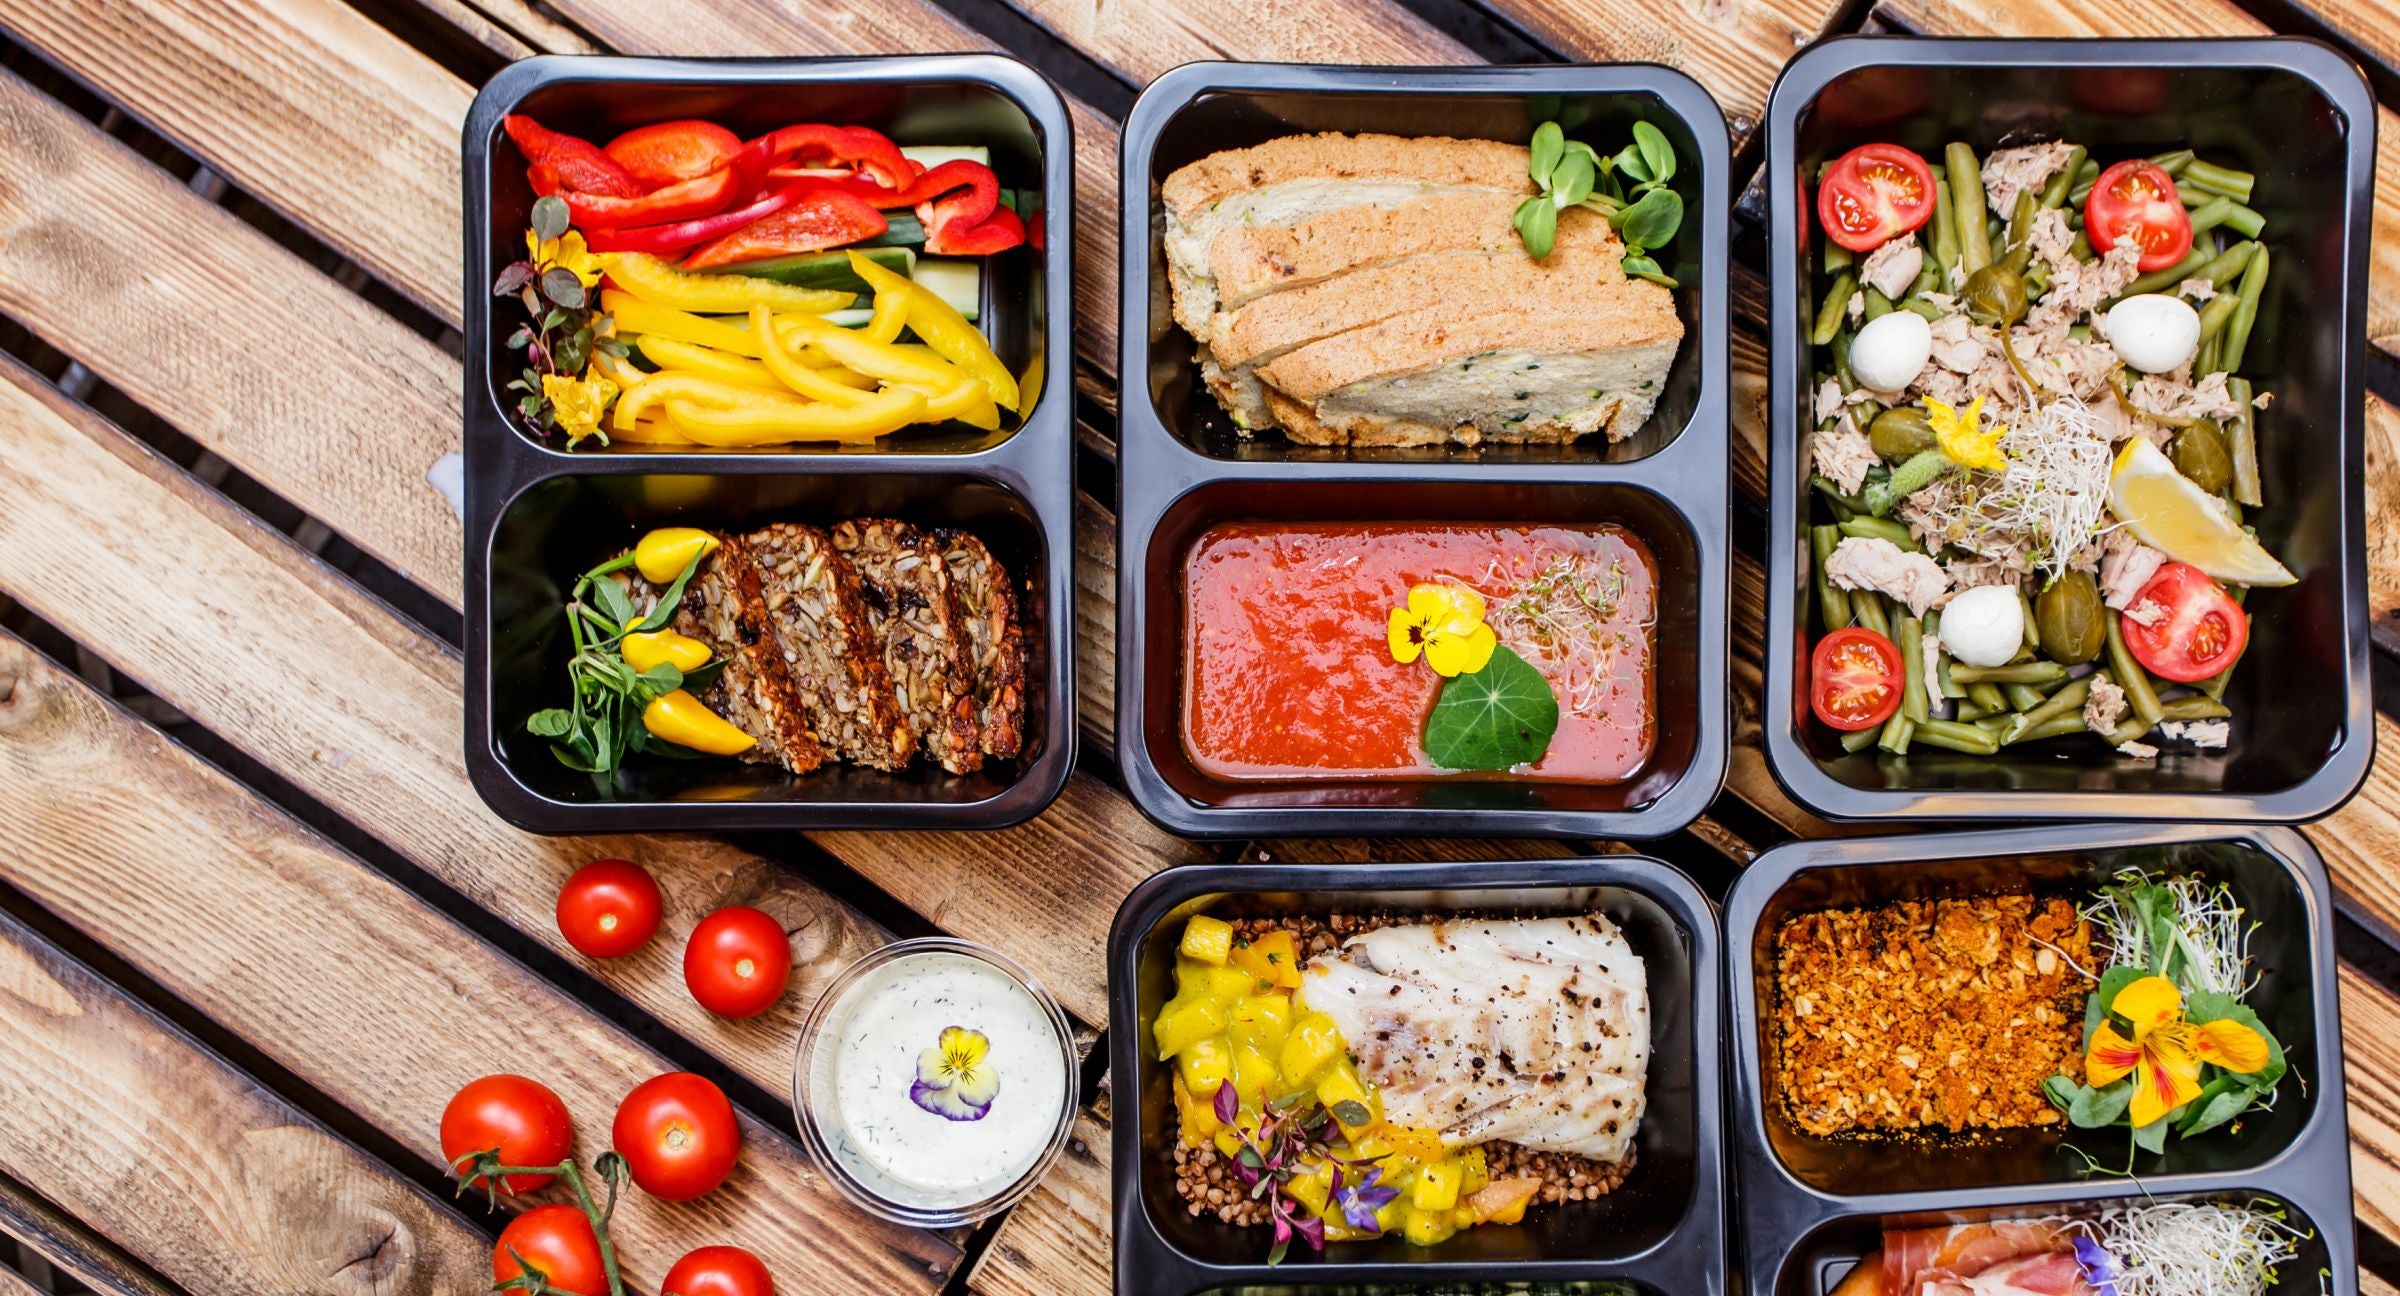 Meal Prep Delivery Services vs. Meal Kits vs. Grocery Delivery: Which